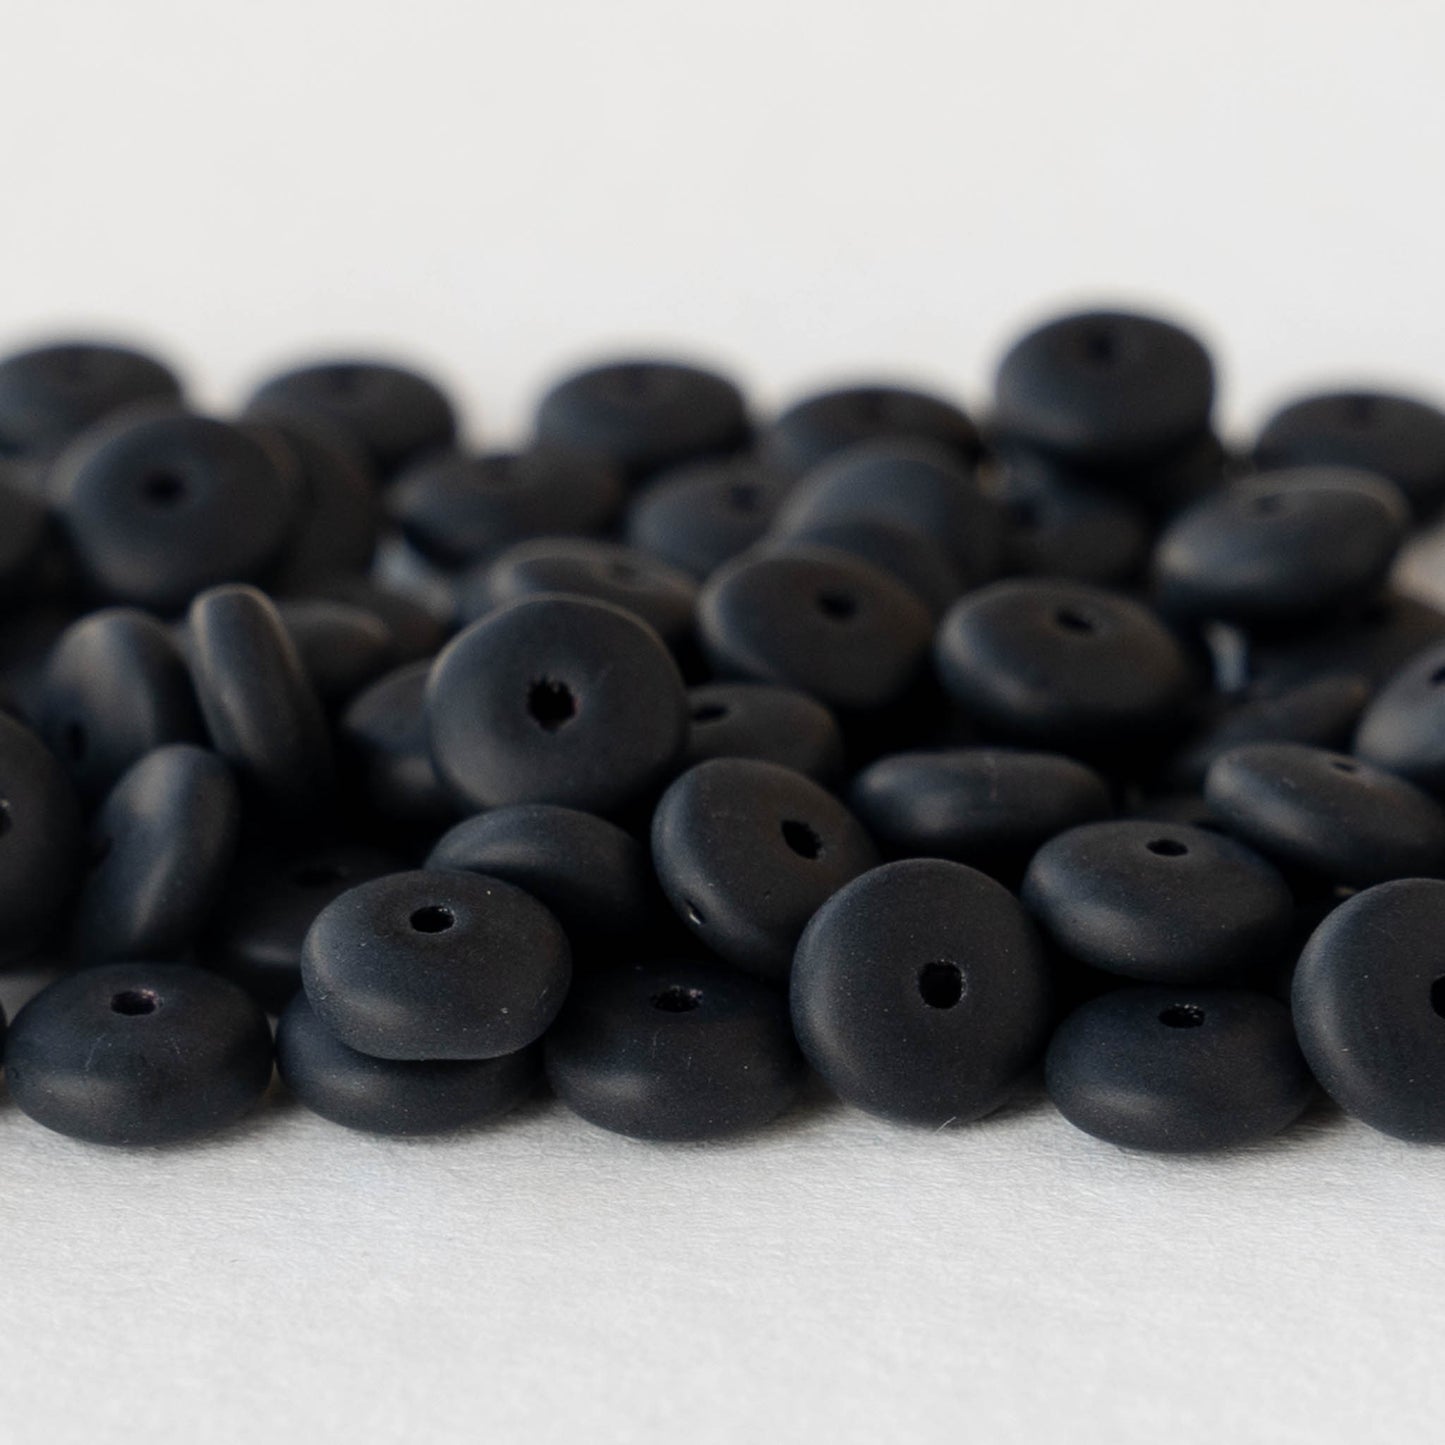 6mm Glass Rondelle Beads - Opaque Black Matte - 100 Beads